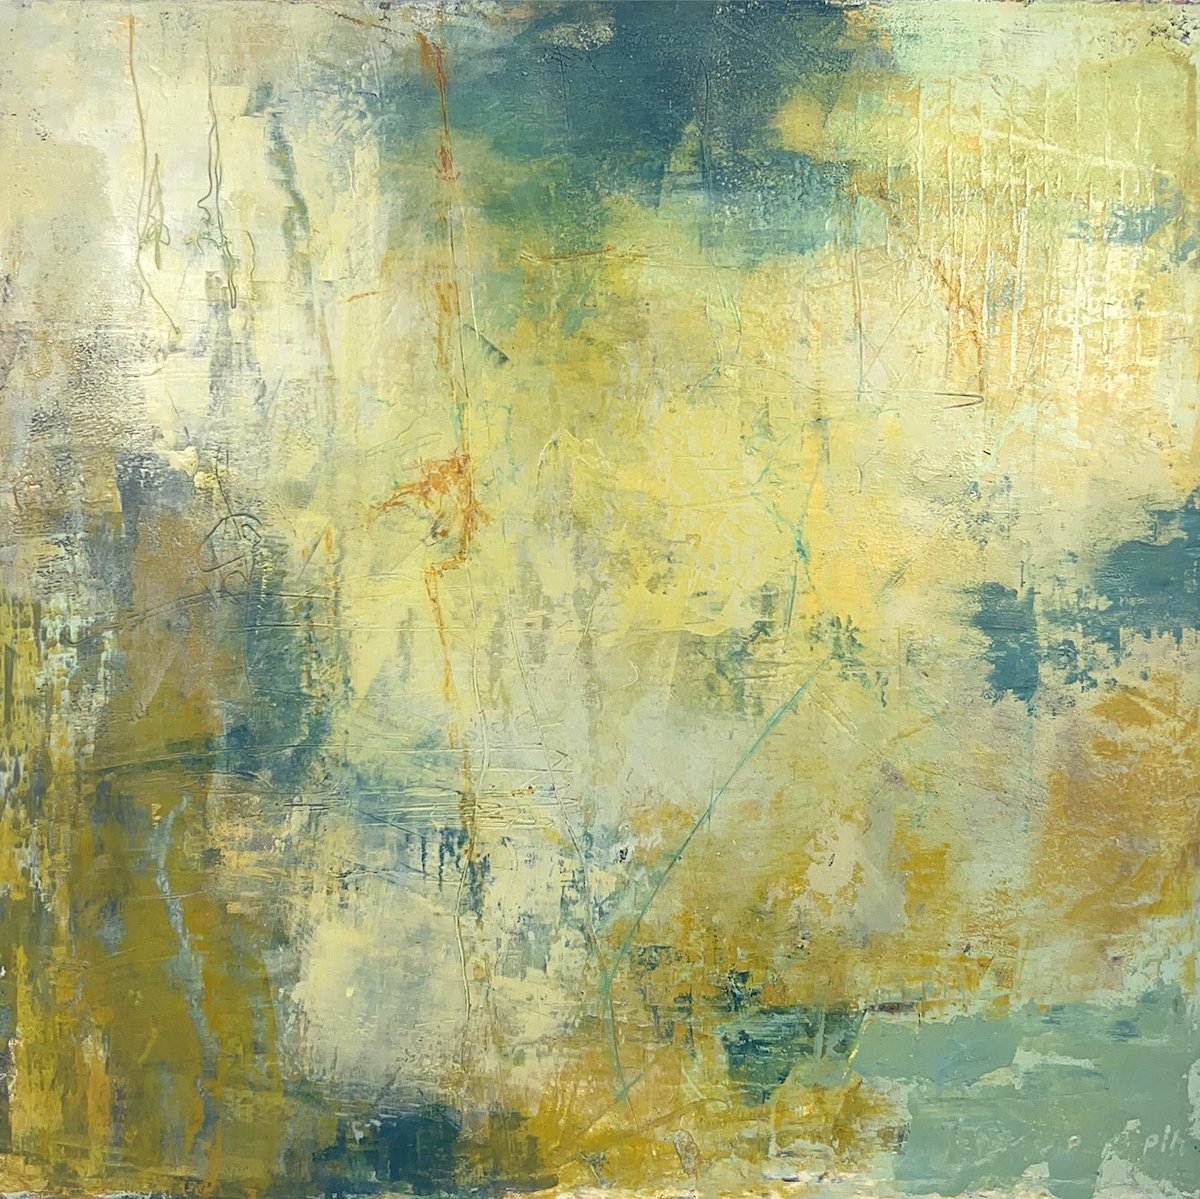 Oil and wax painting by Pamela Hirsch.